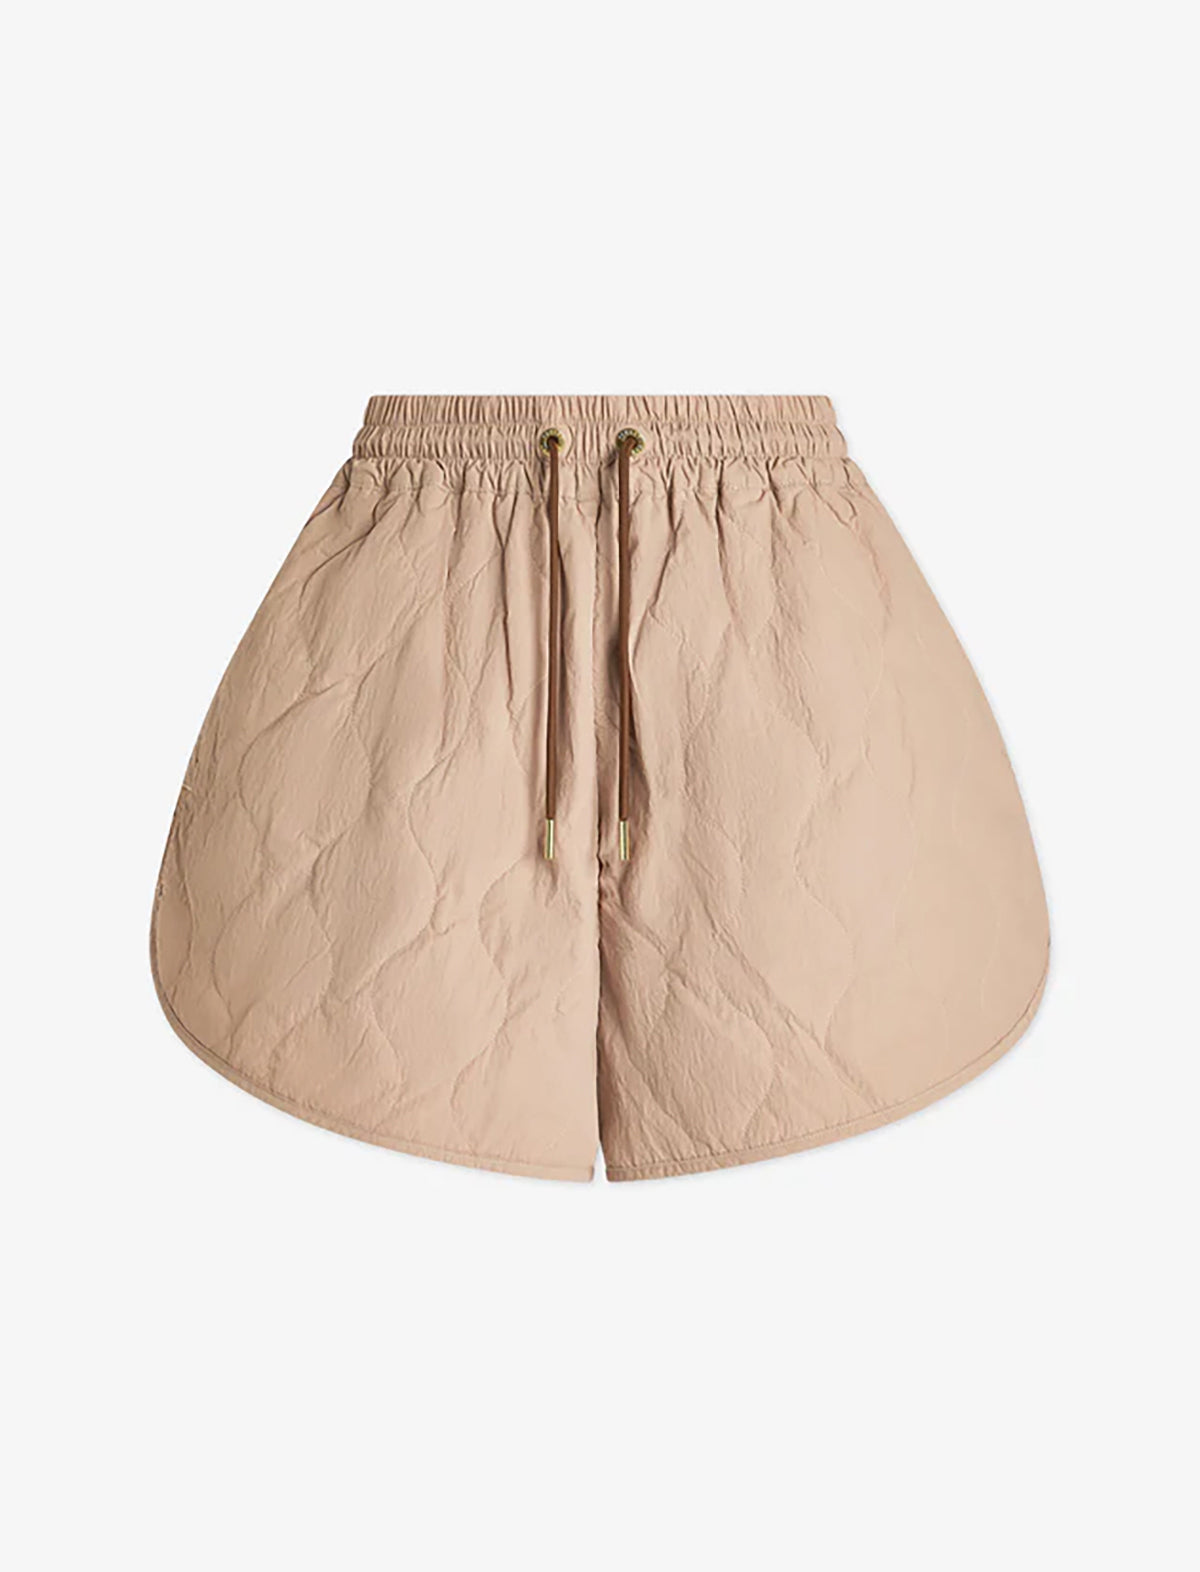 VARLEY Connel Quilt Short in Warm Taupe